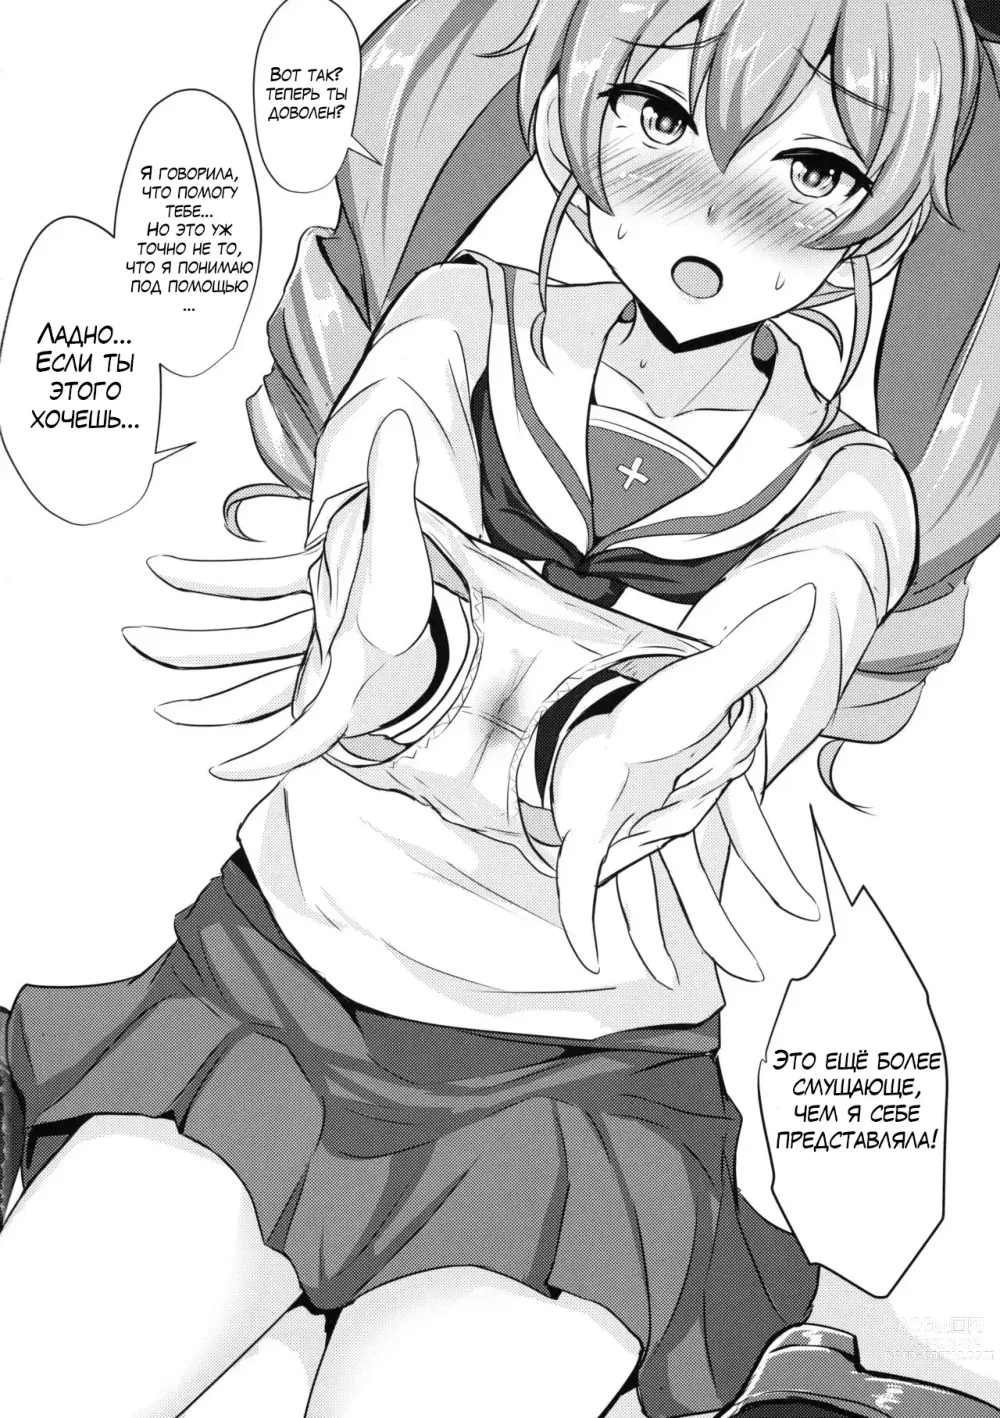 Page 21 of doujinshi Anchovy Nee-san White Sauce Zoe